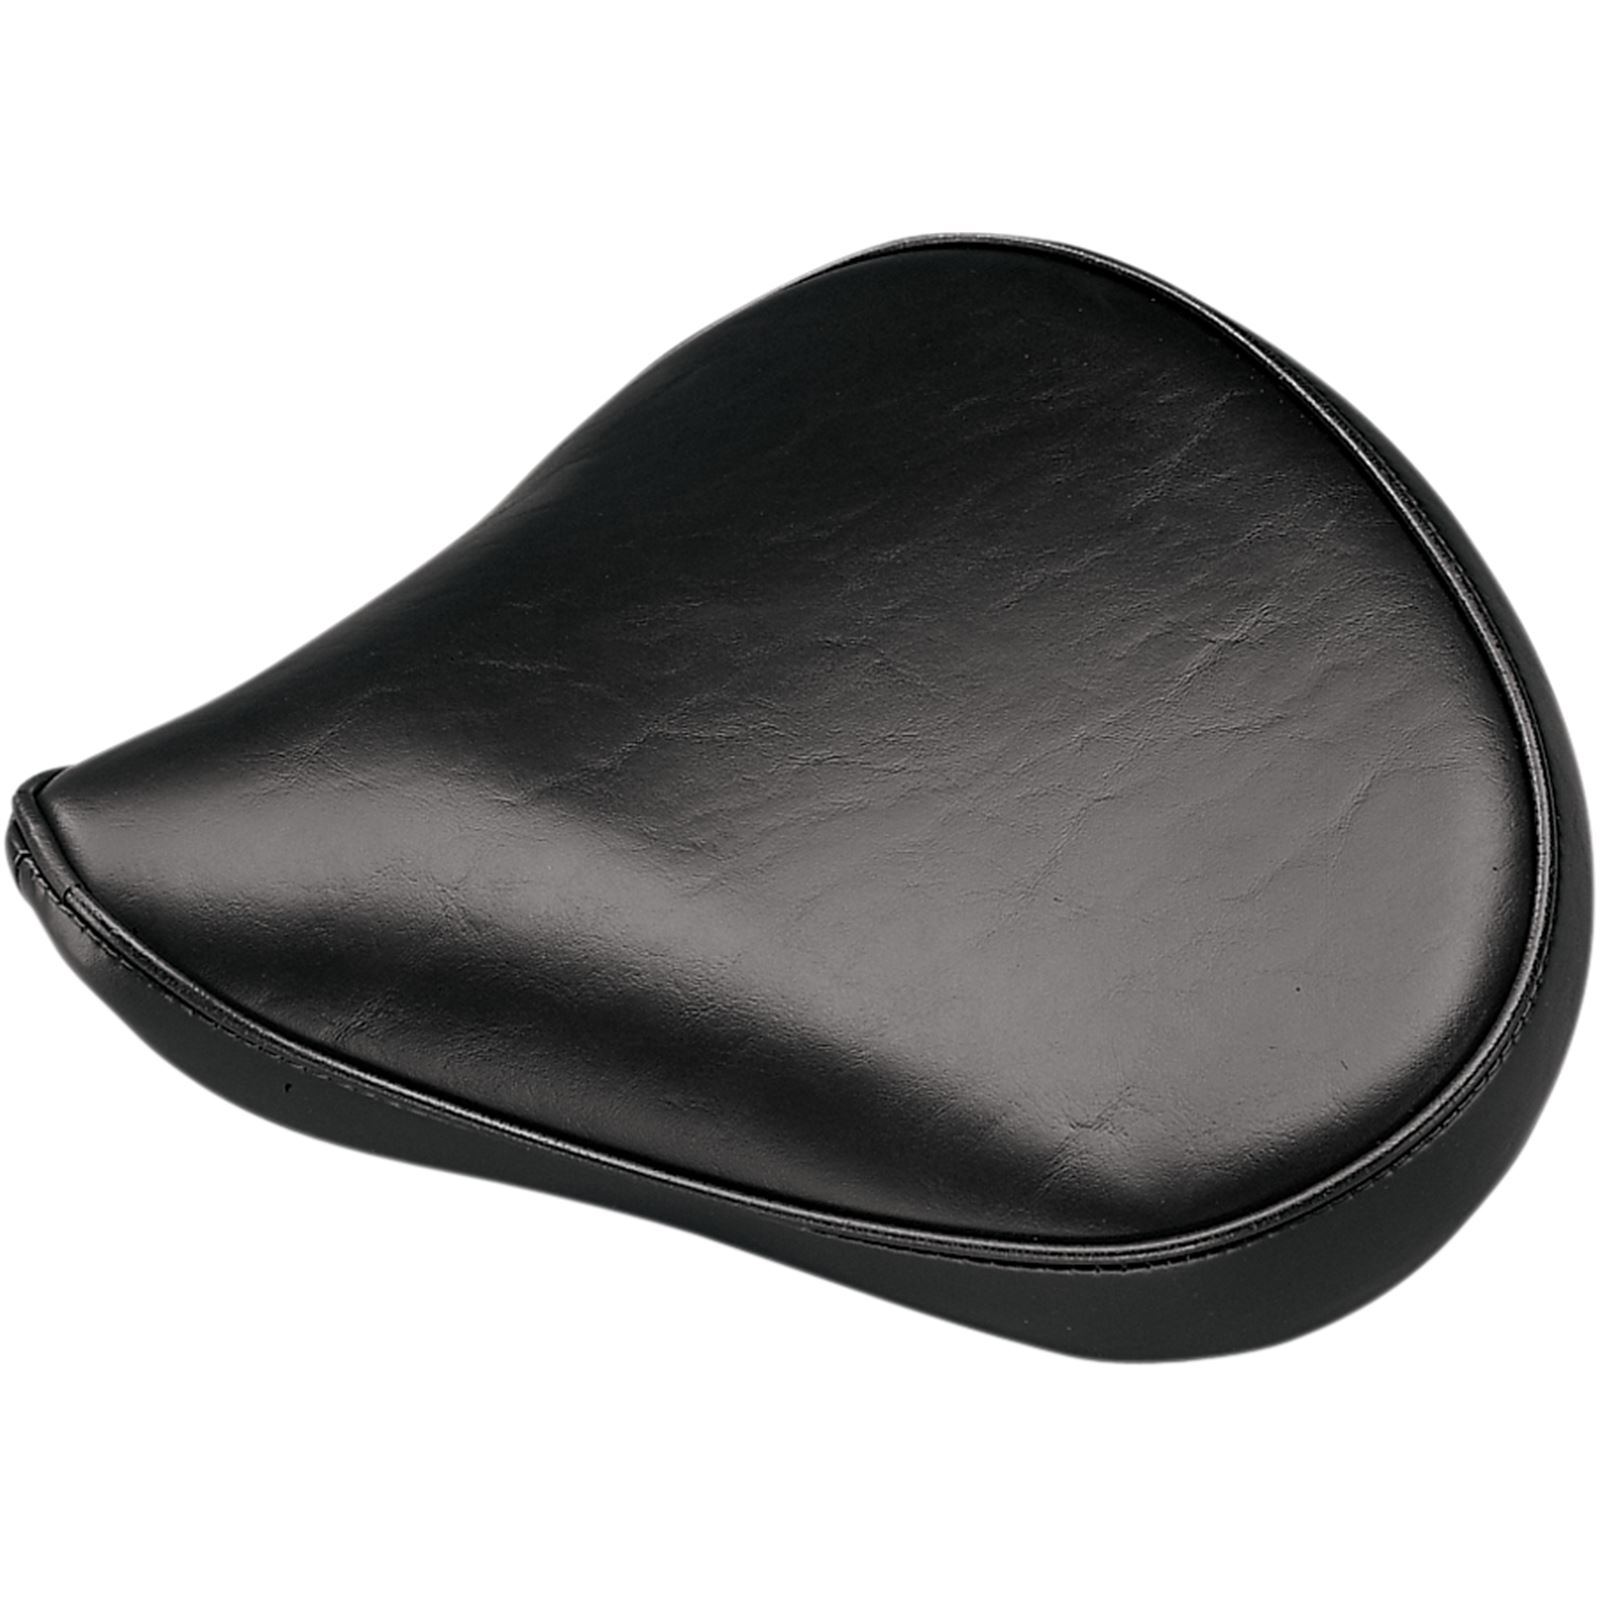 Le Pera Spring Mount Large Solo Seat